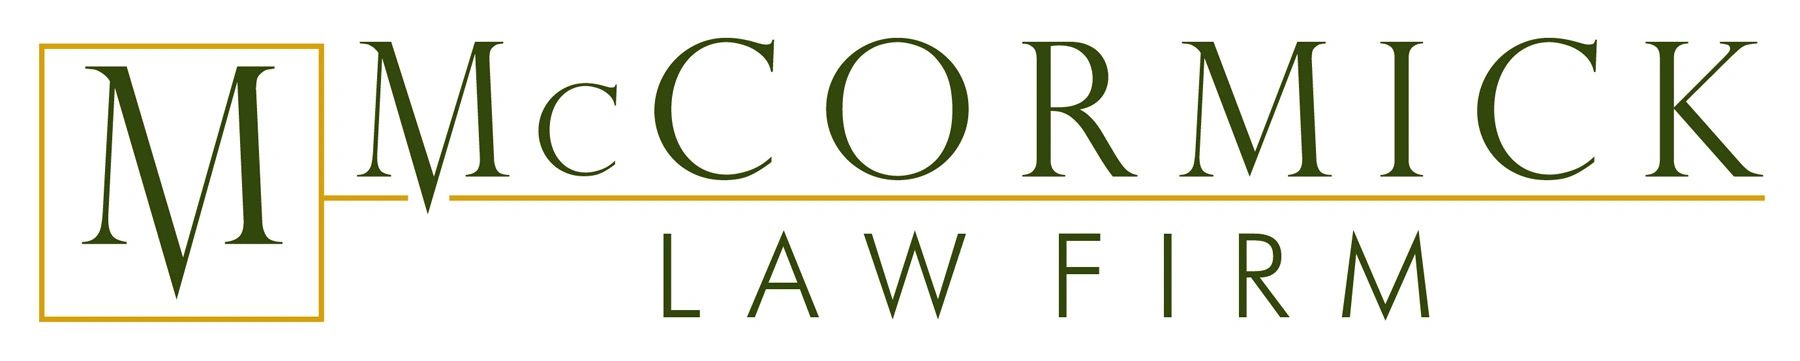 McCormick Law Firm | McCormick Law Firm